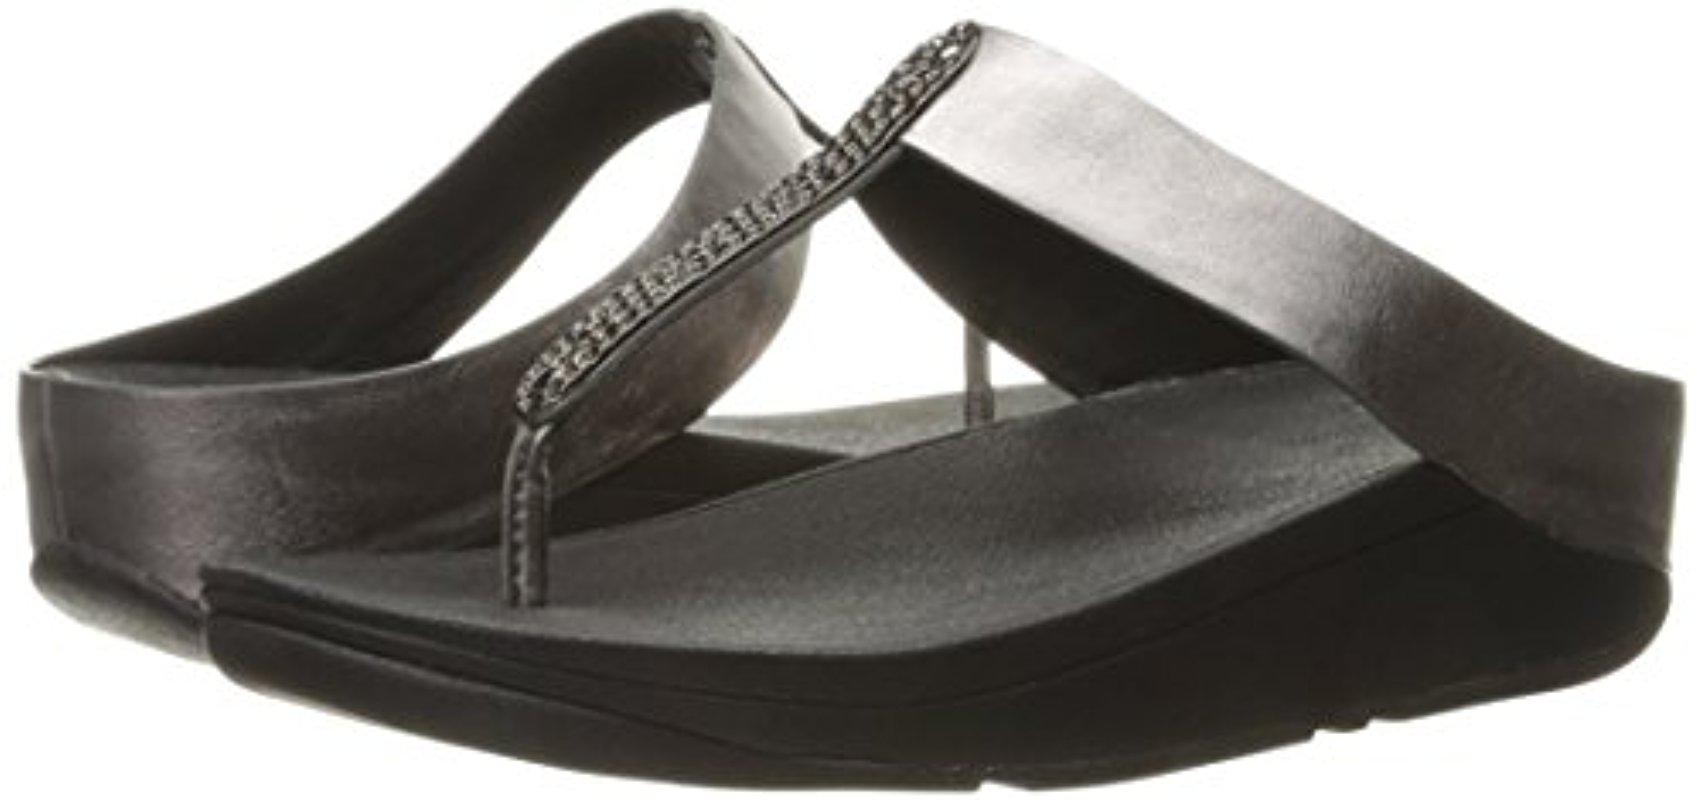 Fitflop Barrio Flip Flop in Pewter 